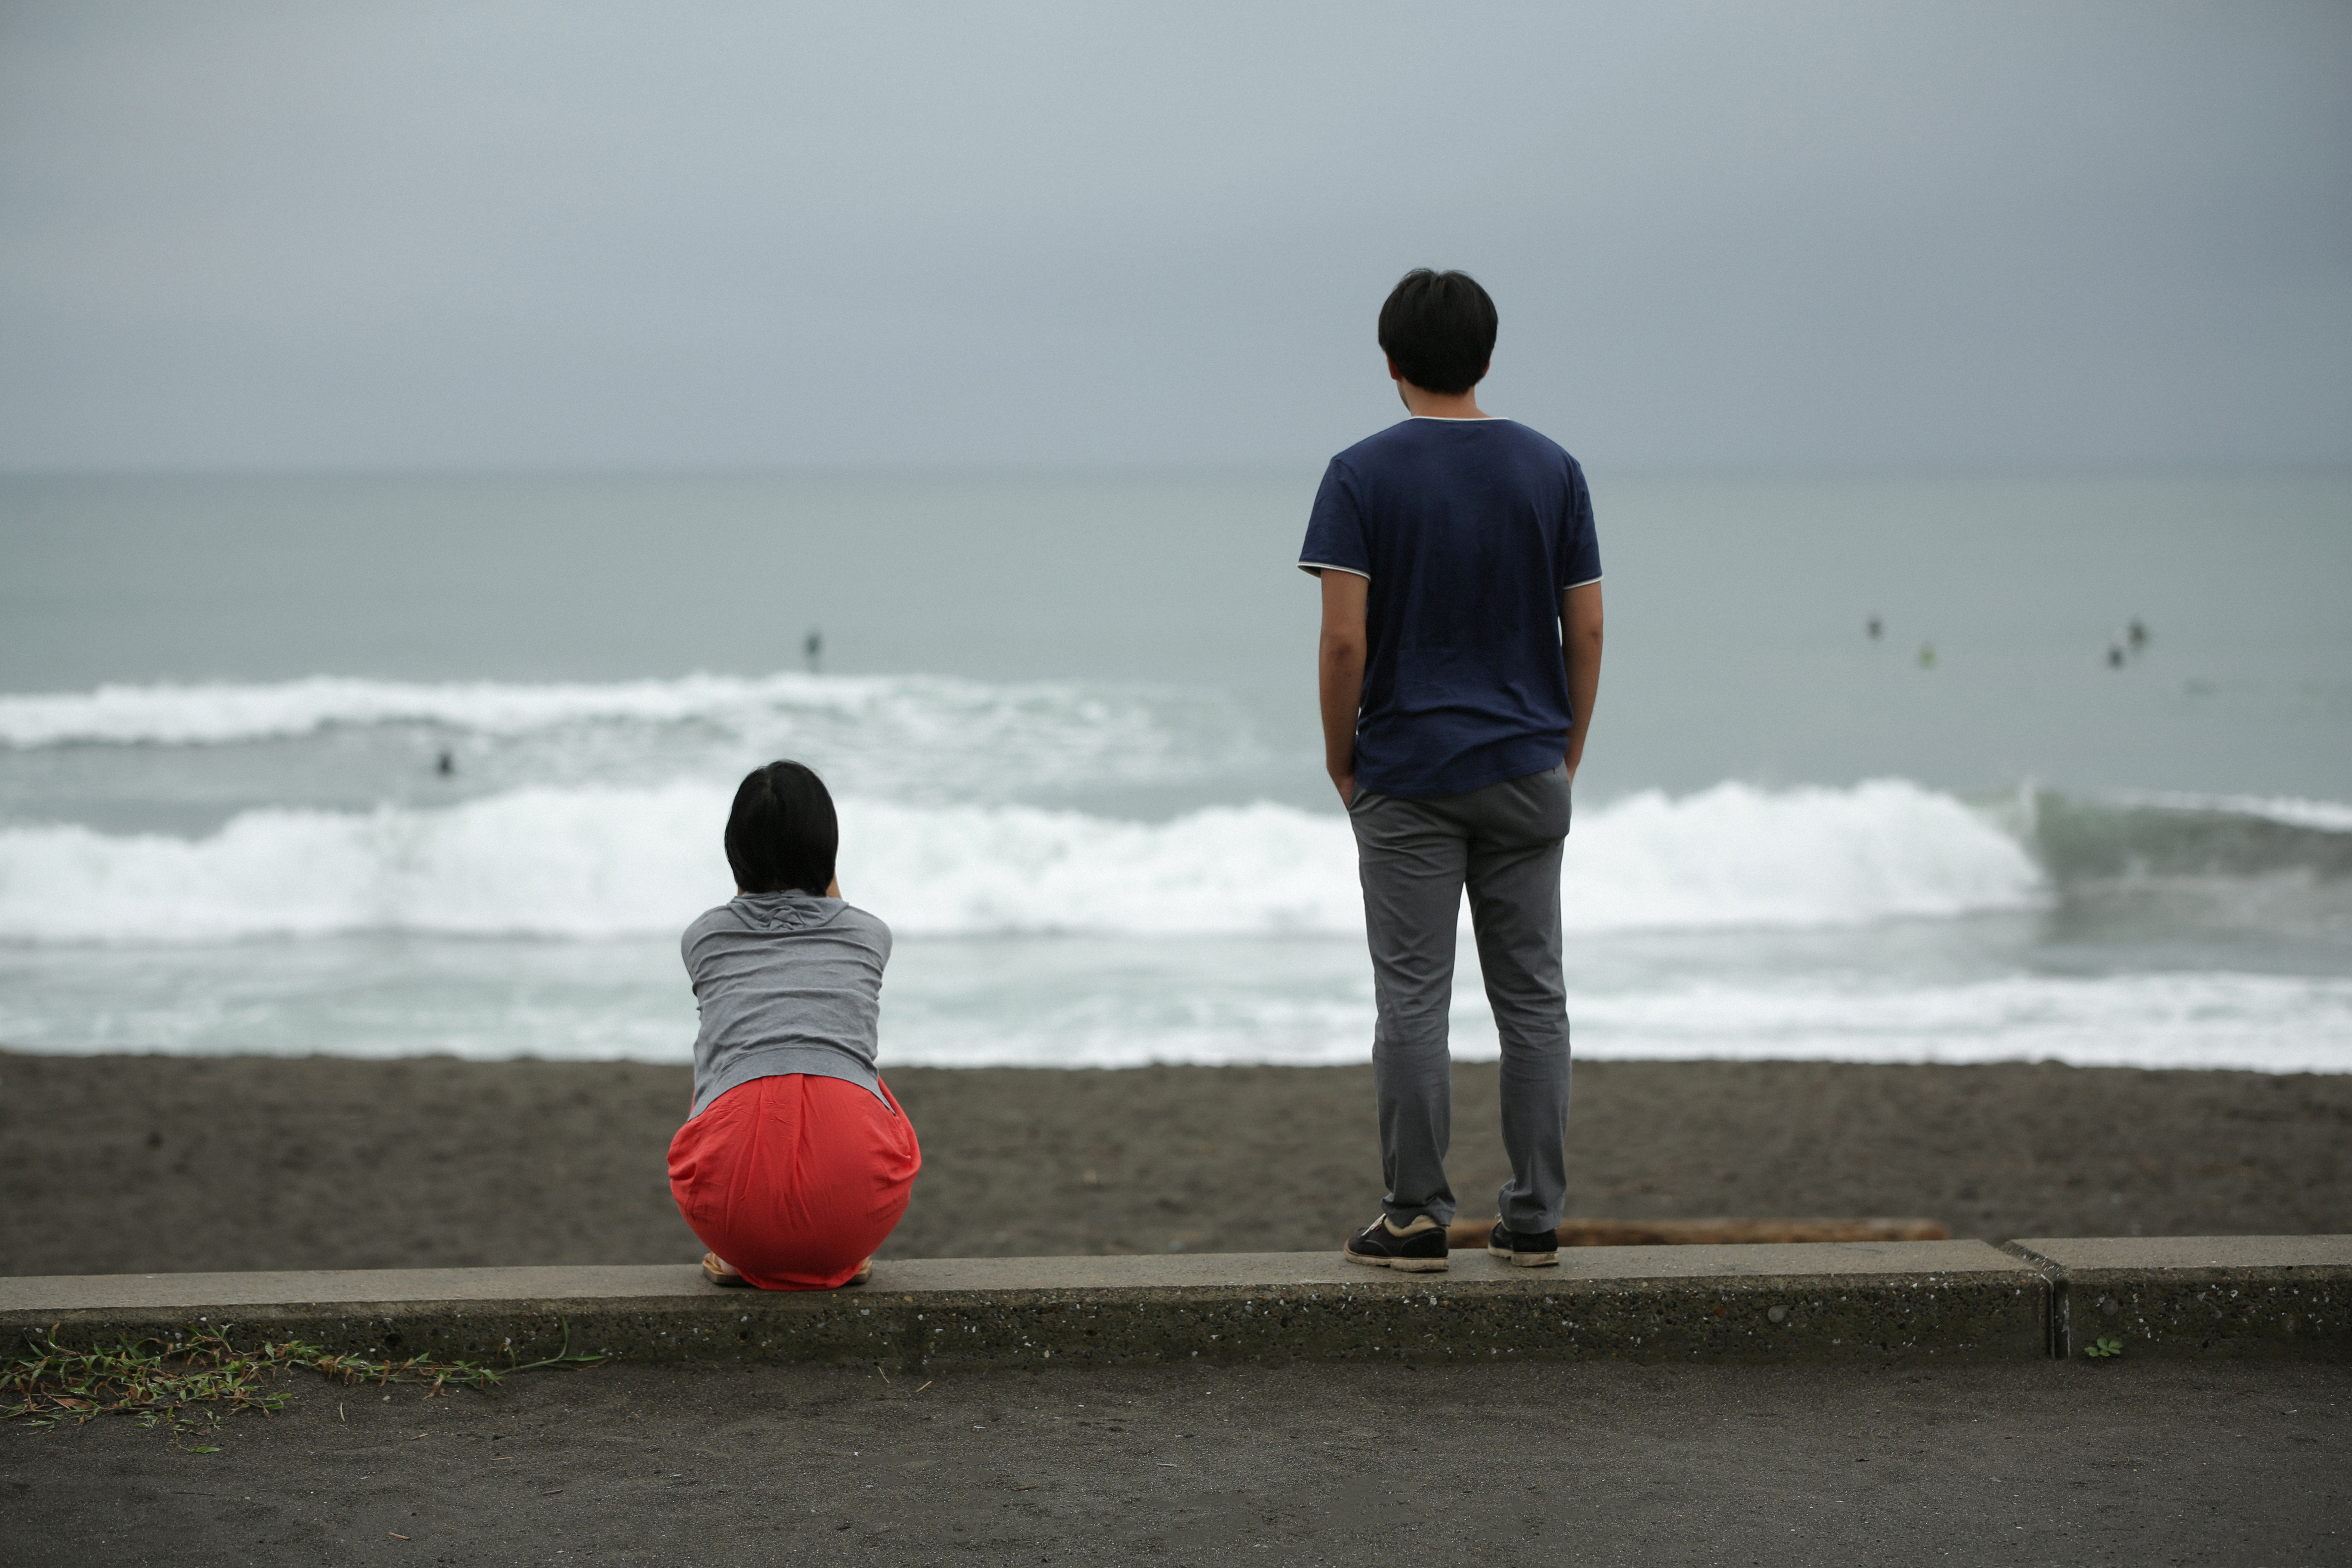 A couple watching the ocean waves with their backs to the camera | Source: Getty Images